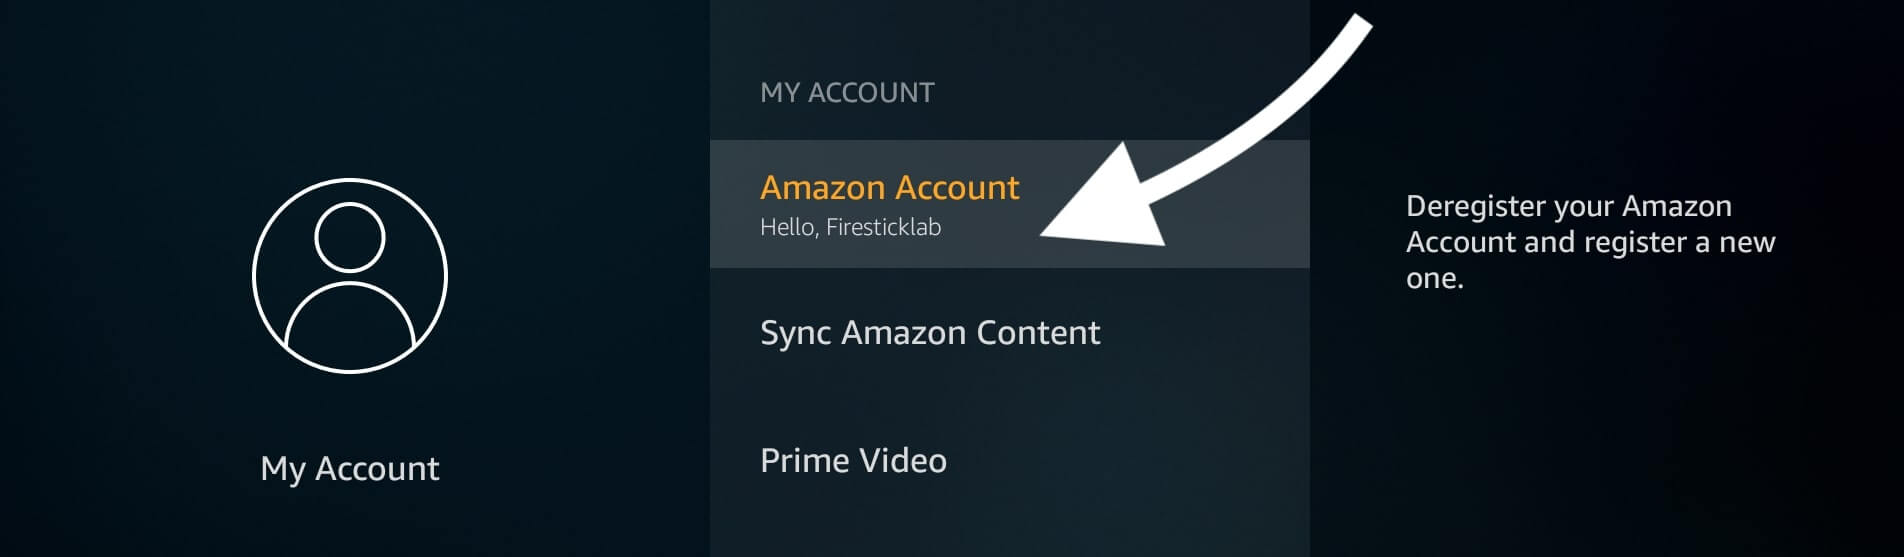 Is-There-a-Monthly-Fee-For-Amazon-Account-For-Firestick